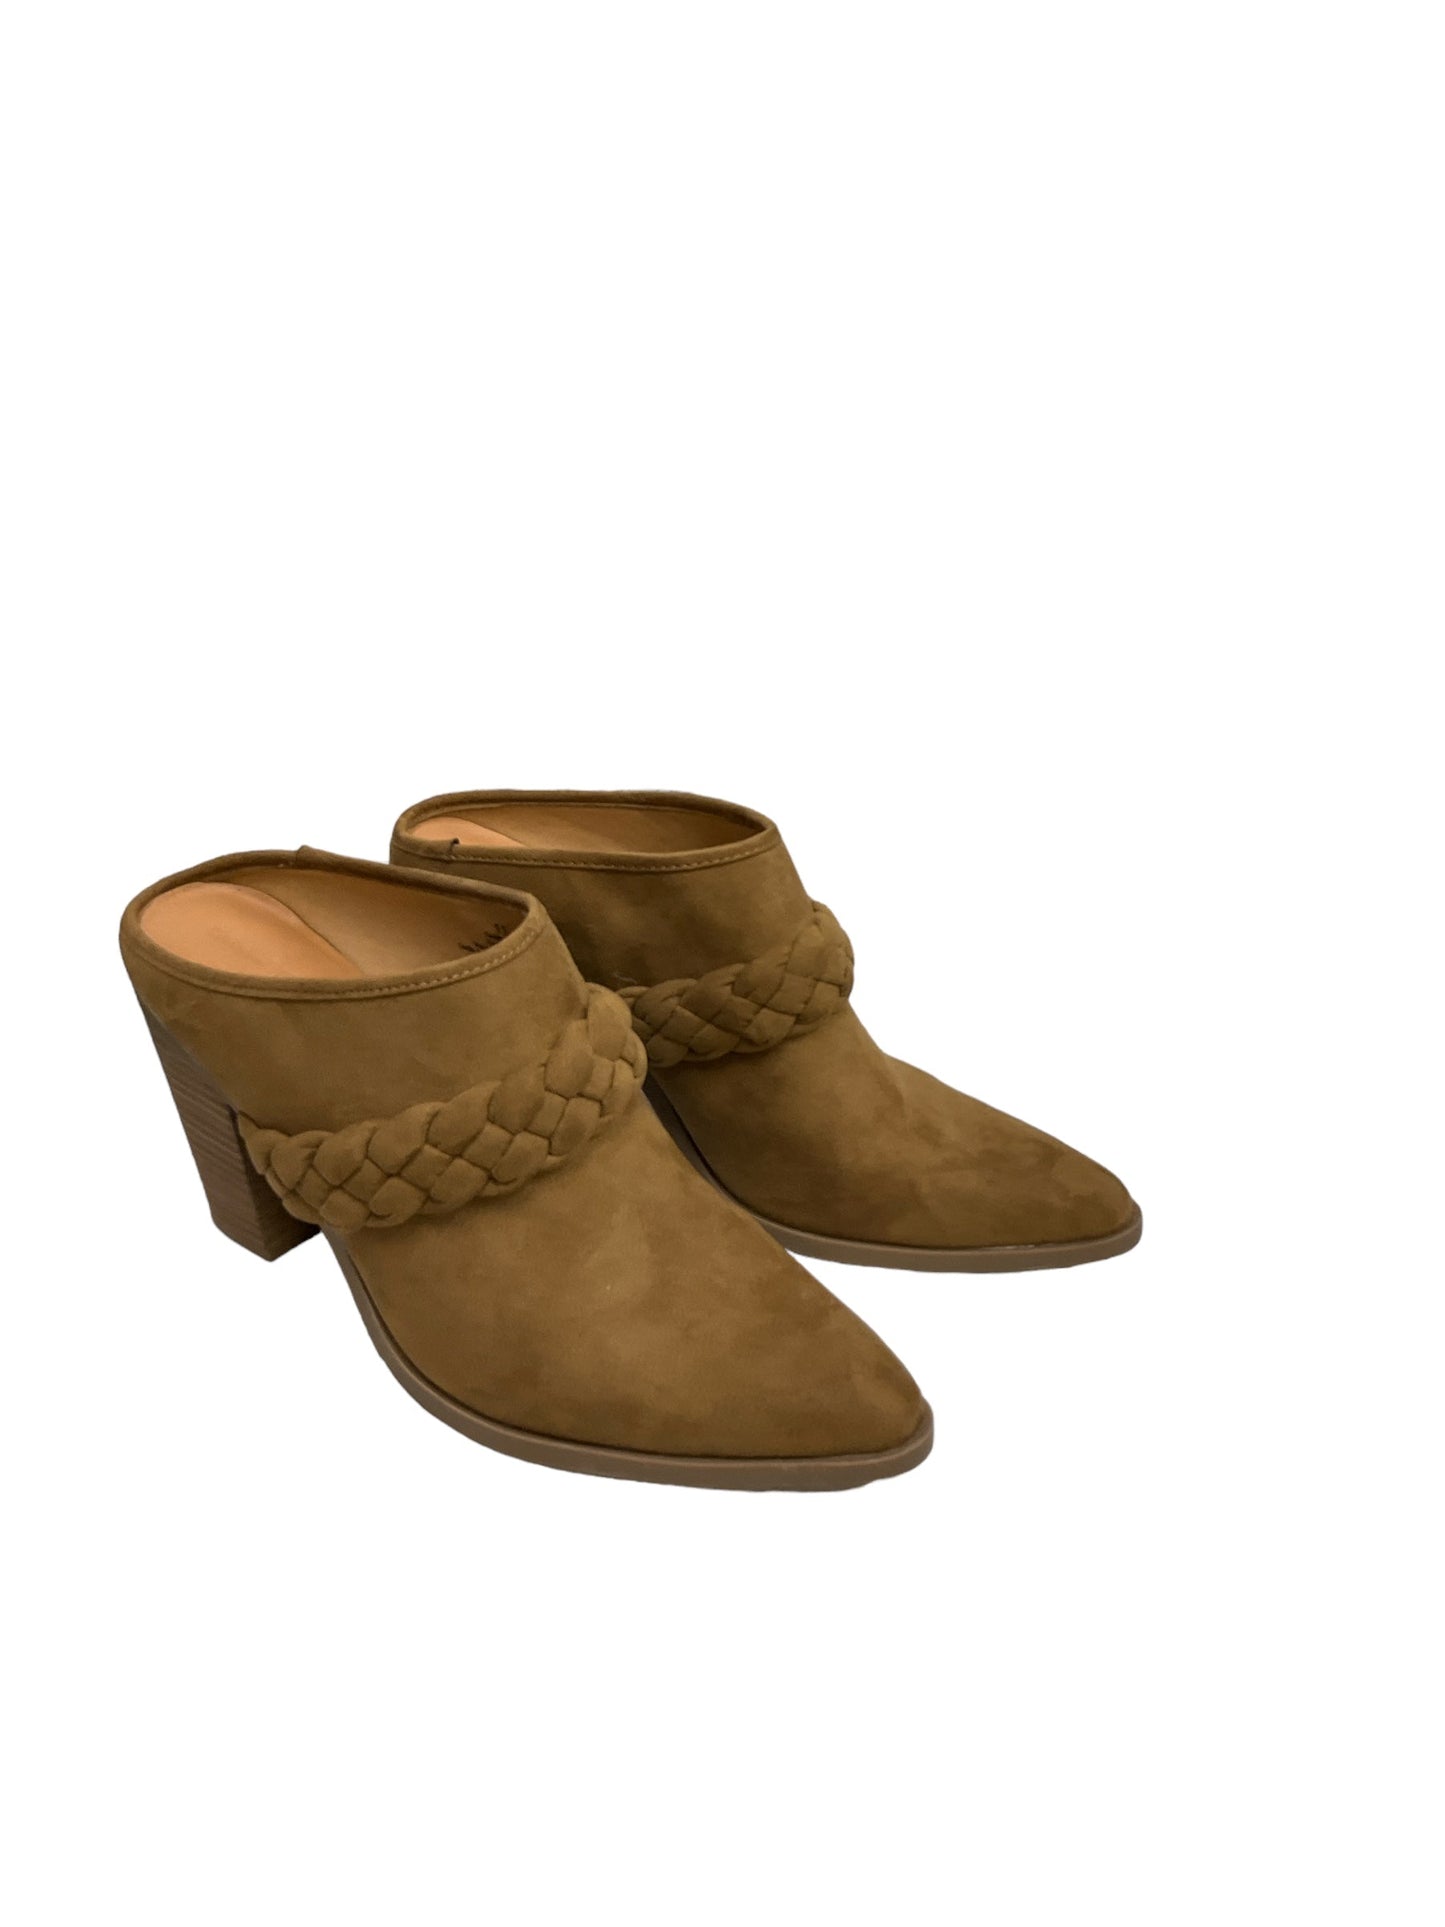 Boots Ankle Heels By Universal Thread  Size: 11